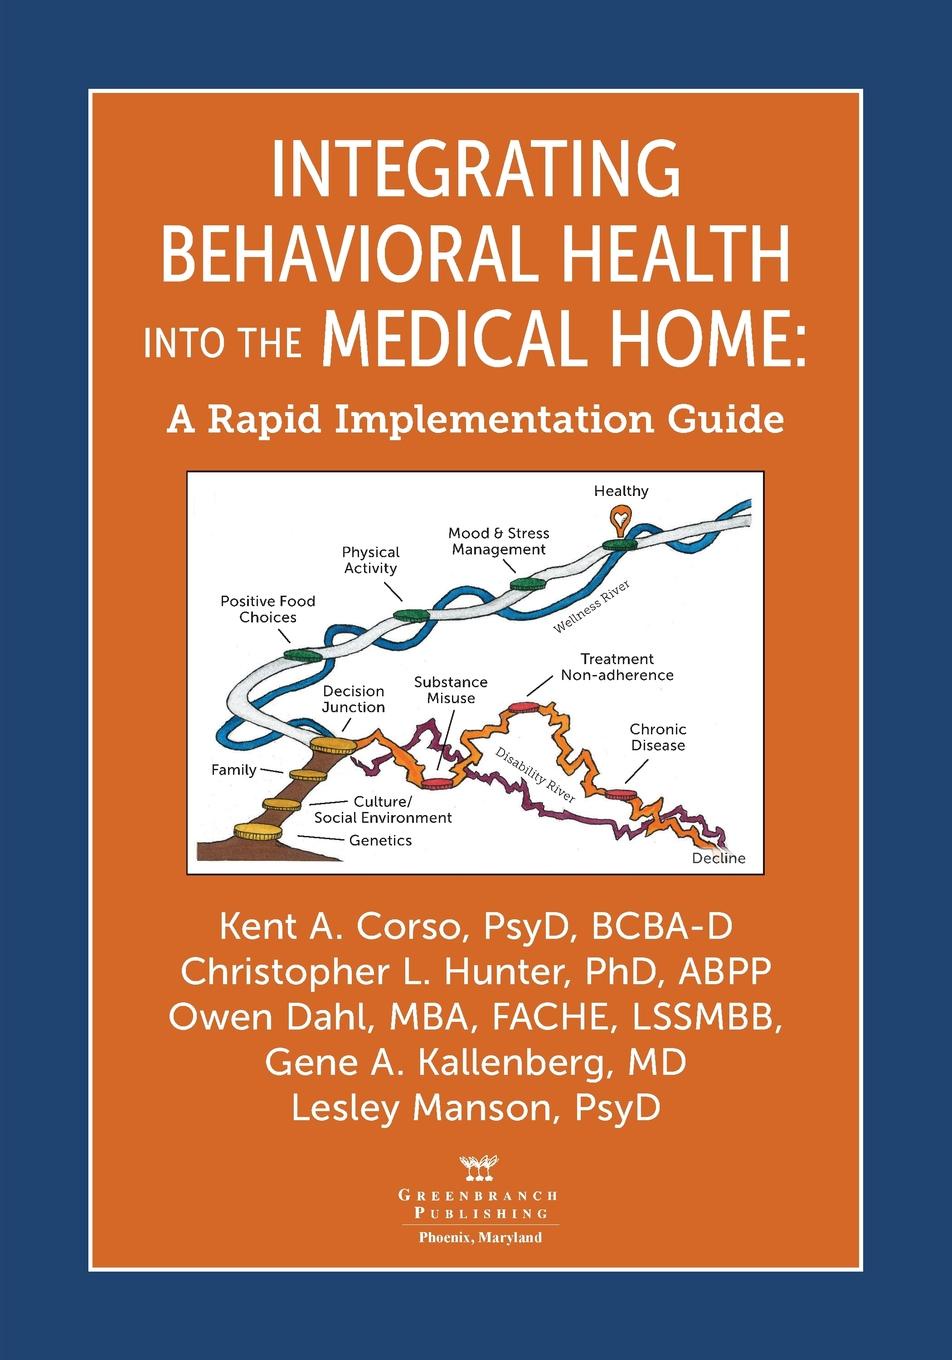 Integrating Behavioral Health Into the Medical Home. A Rapid Implementation Guide